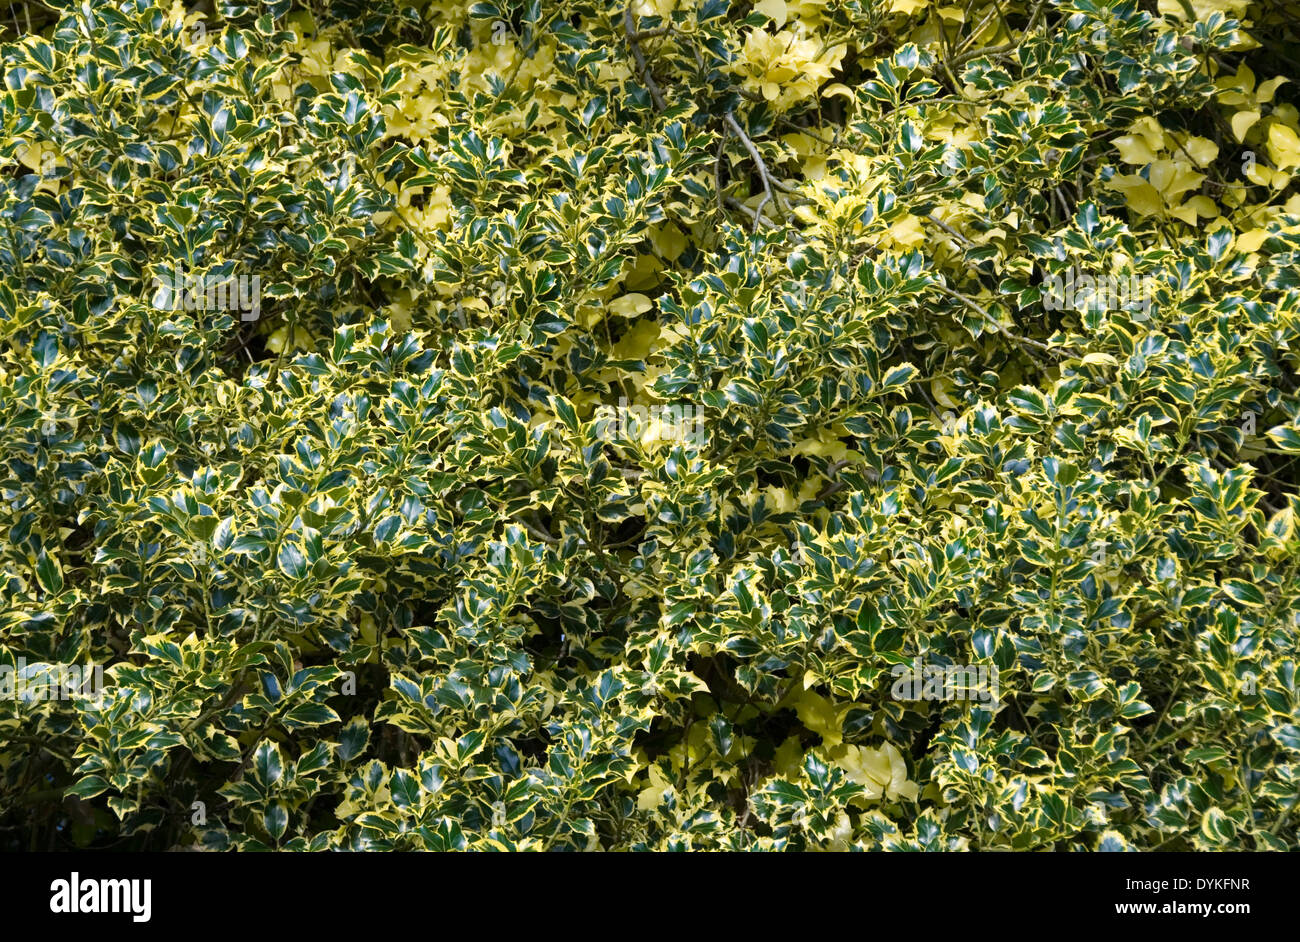 Golden King Holly leaves : a glossy green leaf with a yellow edge, natural background Stock Photo